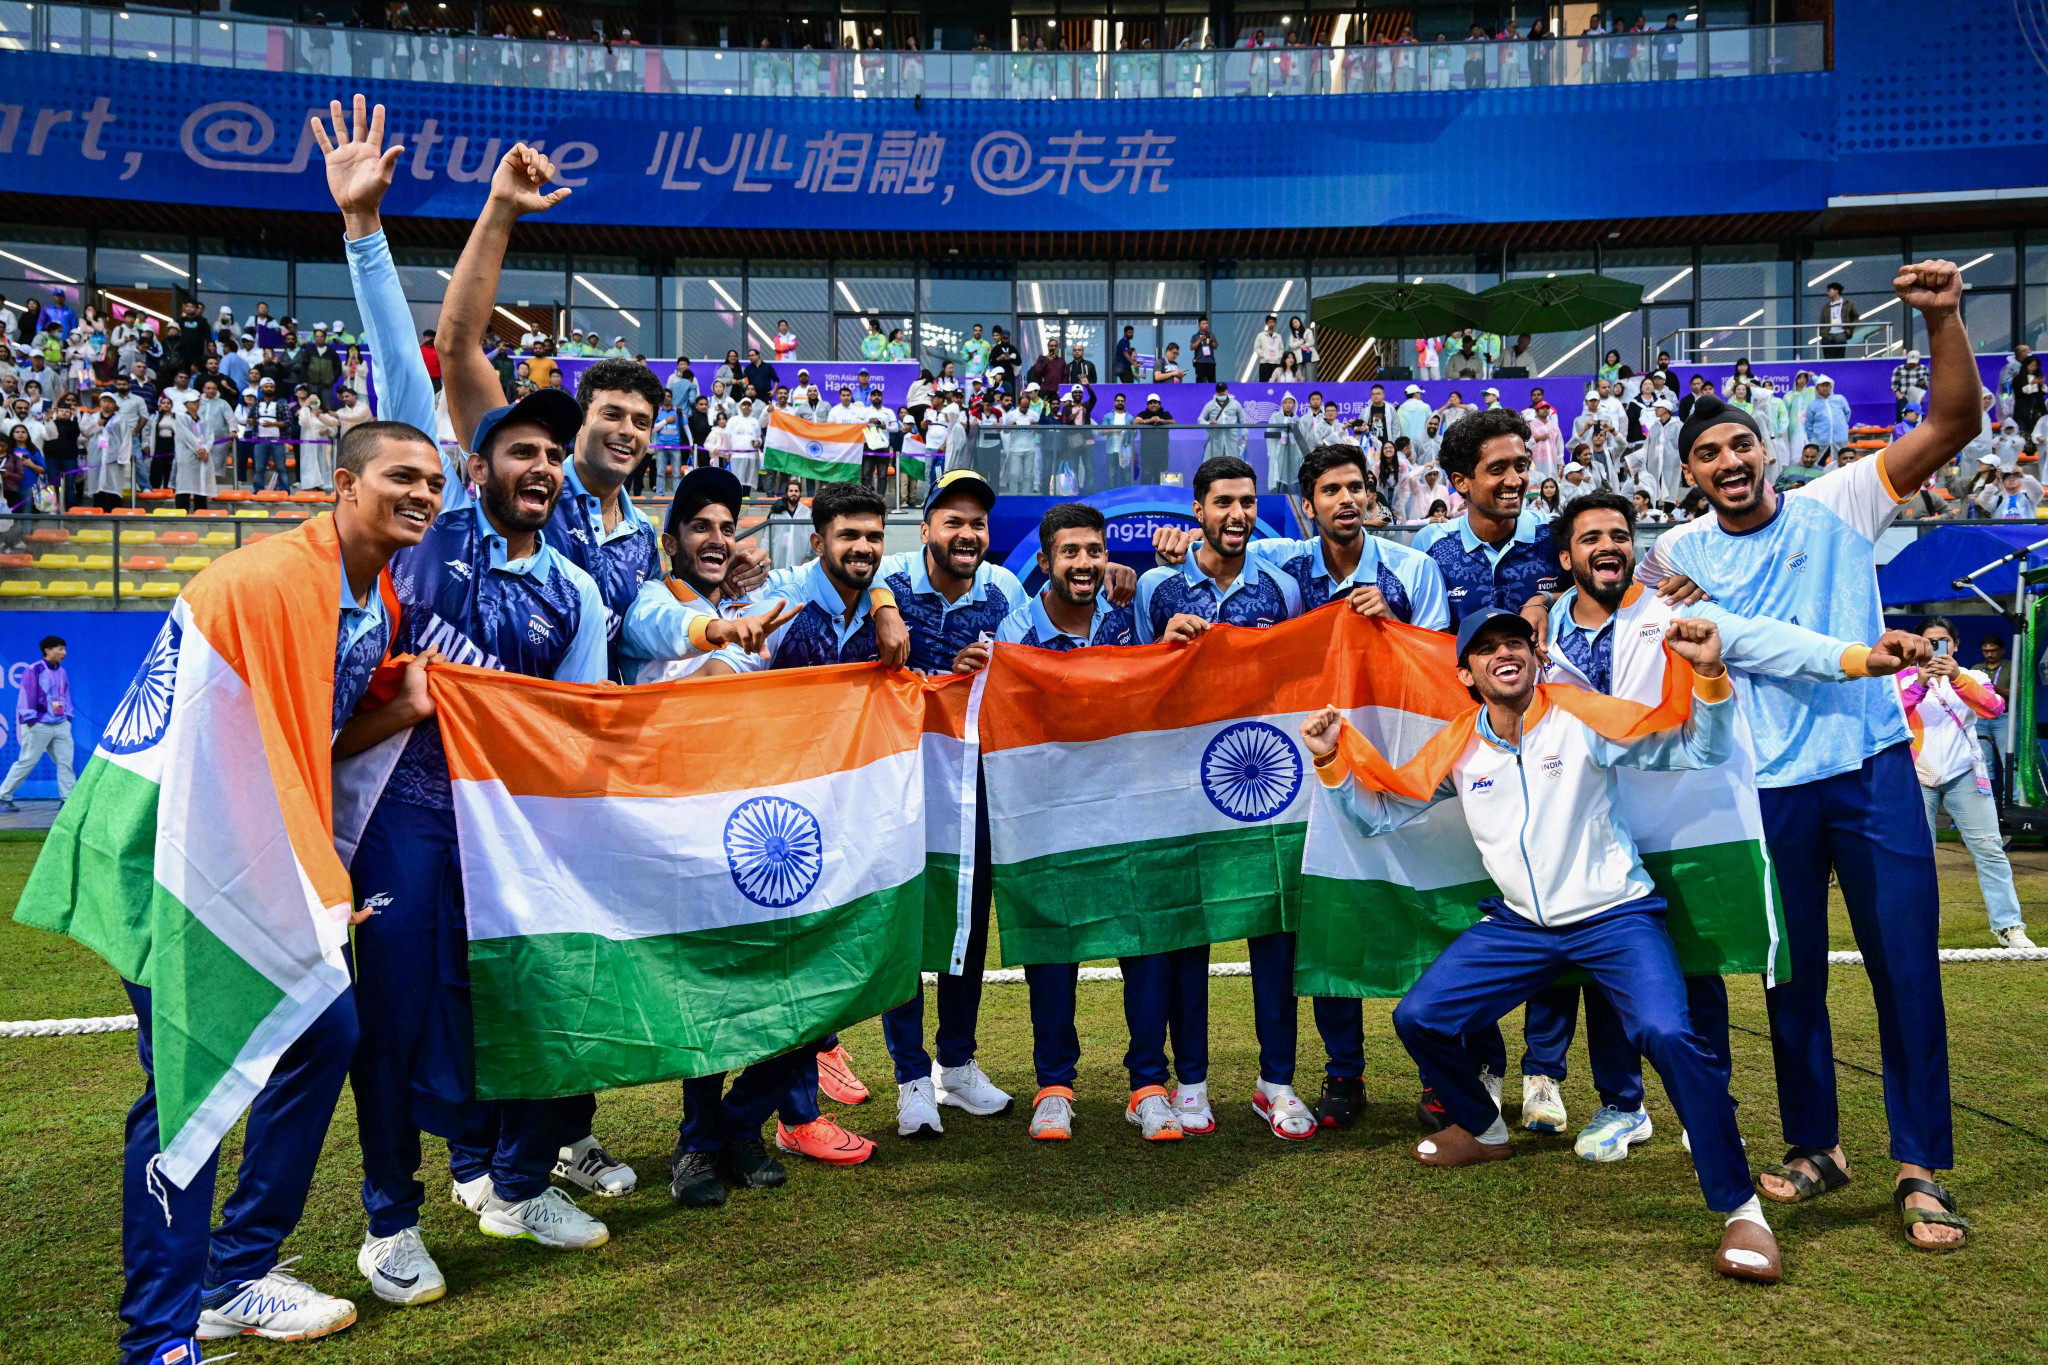 India won men's cricket gold after rain stopped play in their match against Afghanistan ©Getty Images